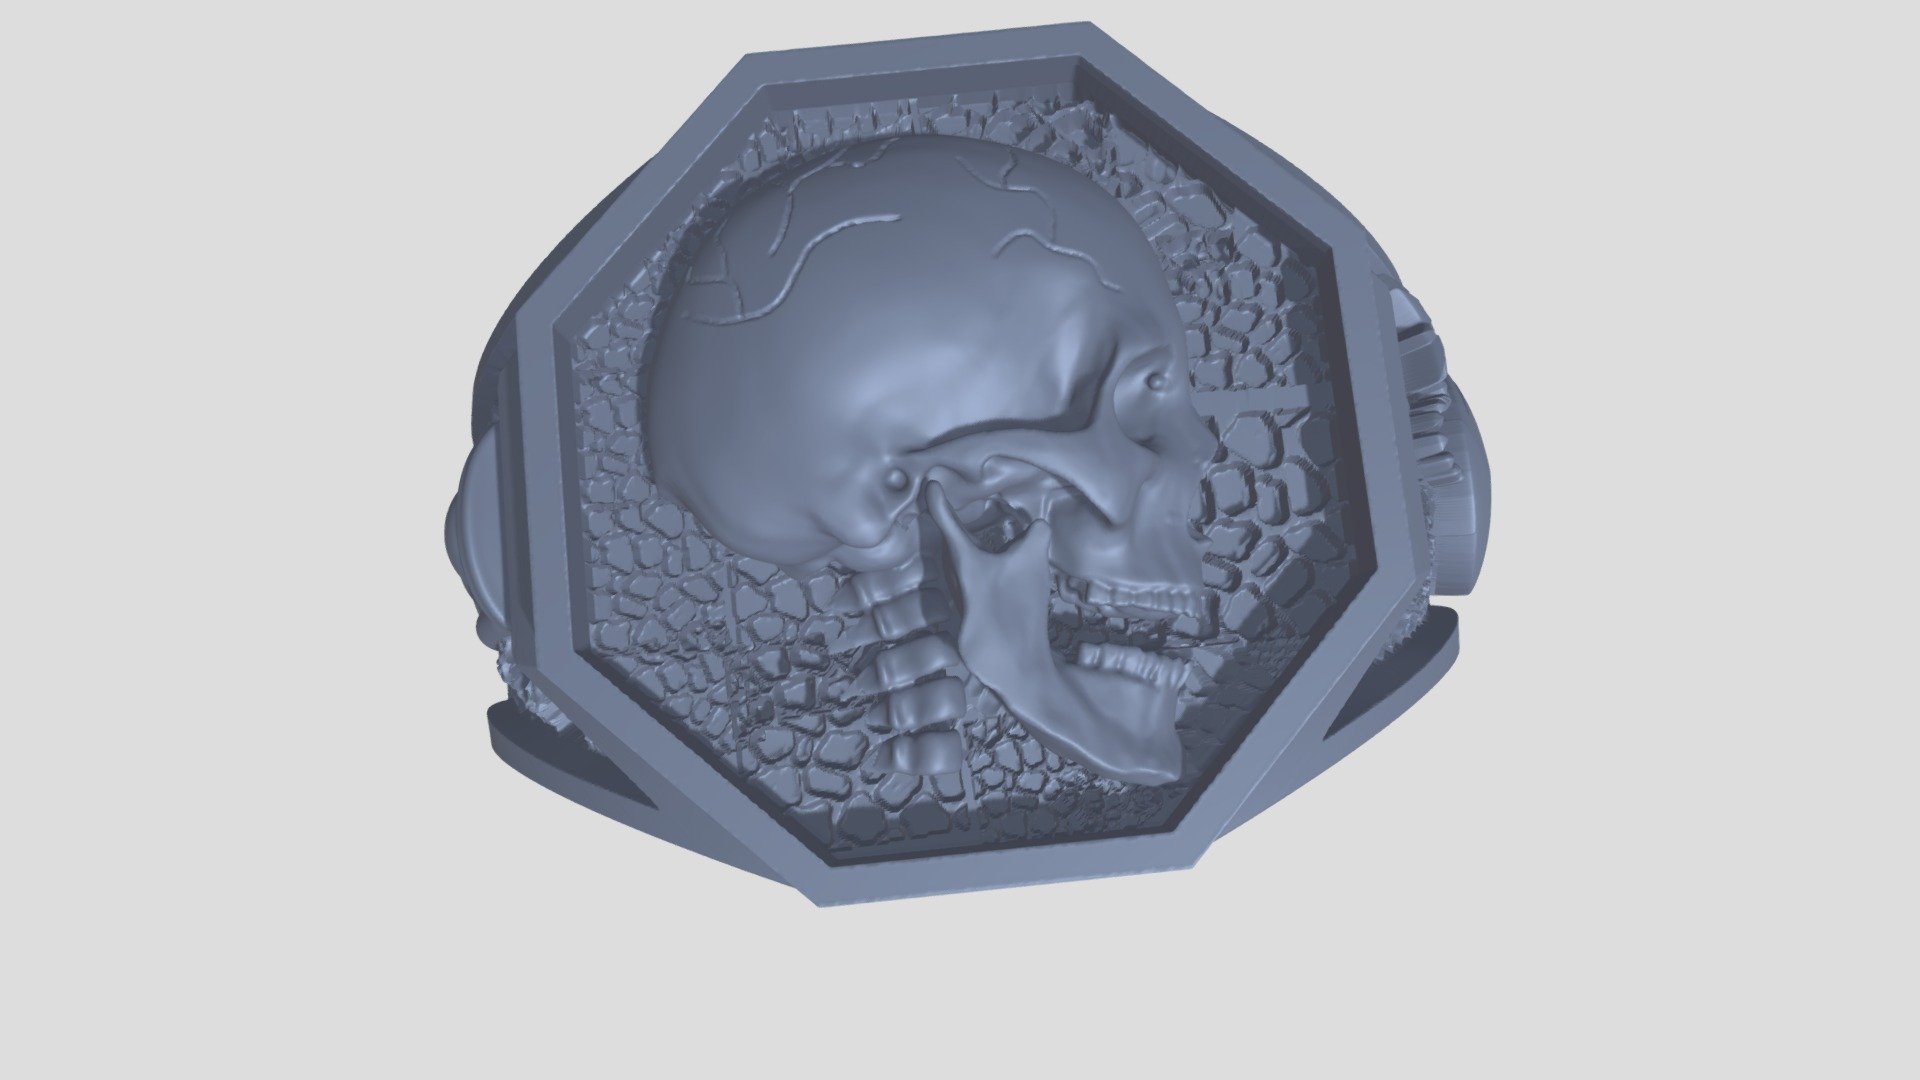 THIS IS A MEMENTO MORI RING. THE AMERICAN SIZE:1O 3d model